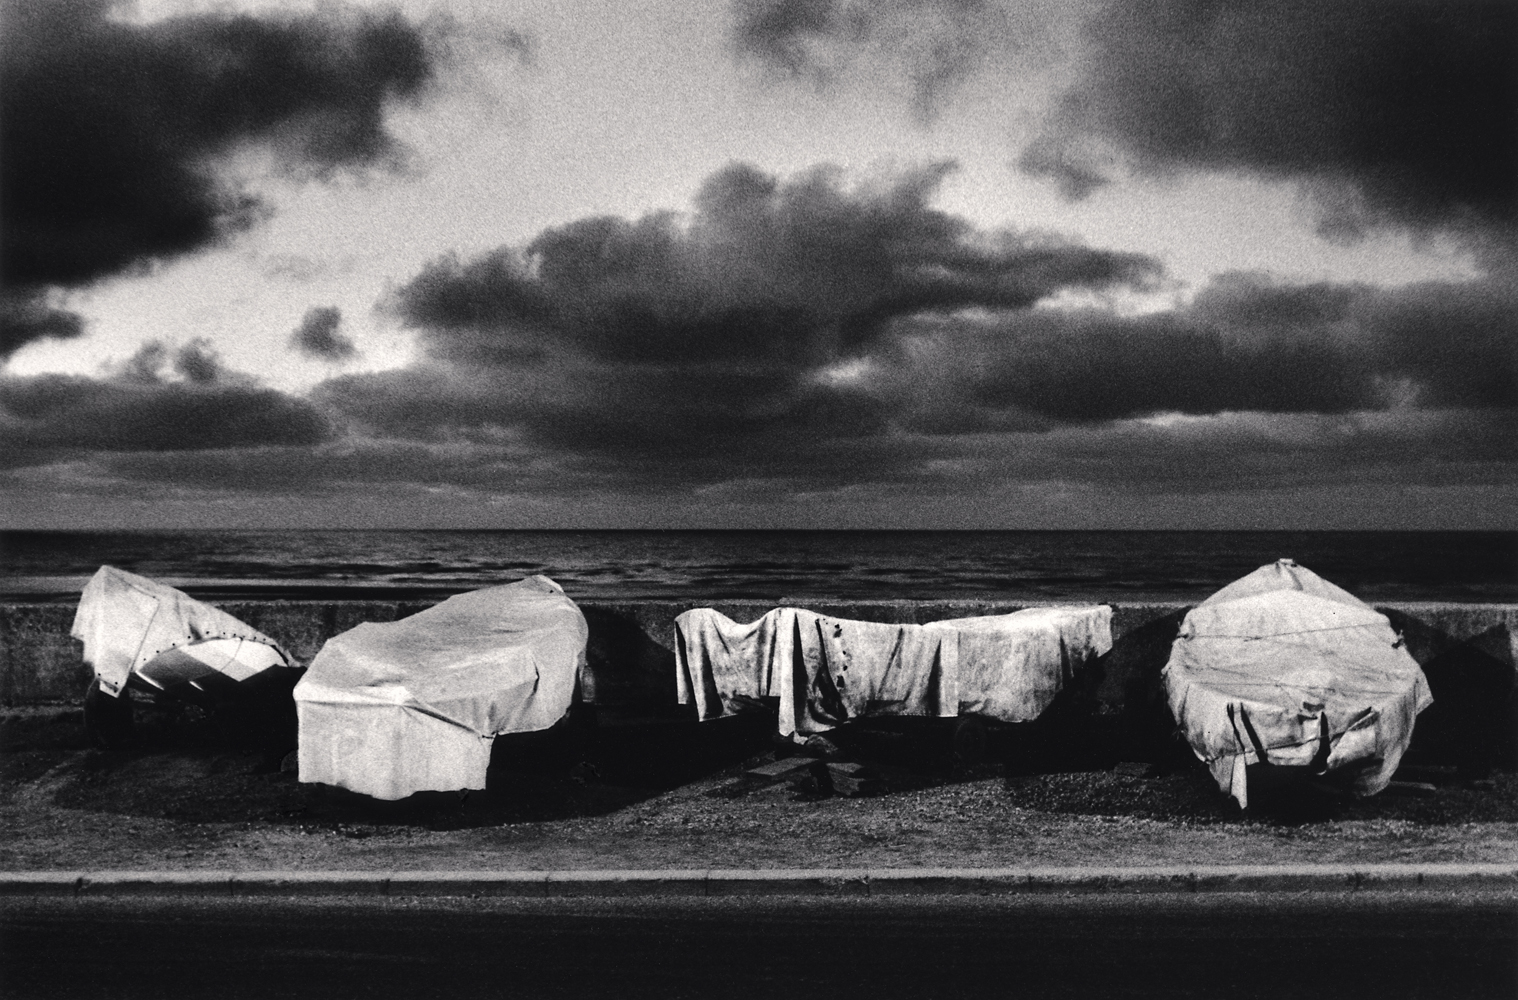 Michael Kenna, Draped Boats, North Whitby, Yorkshire, England, 1986